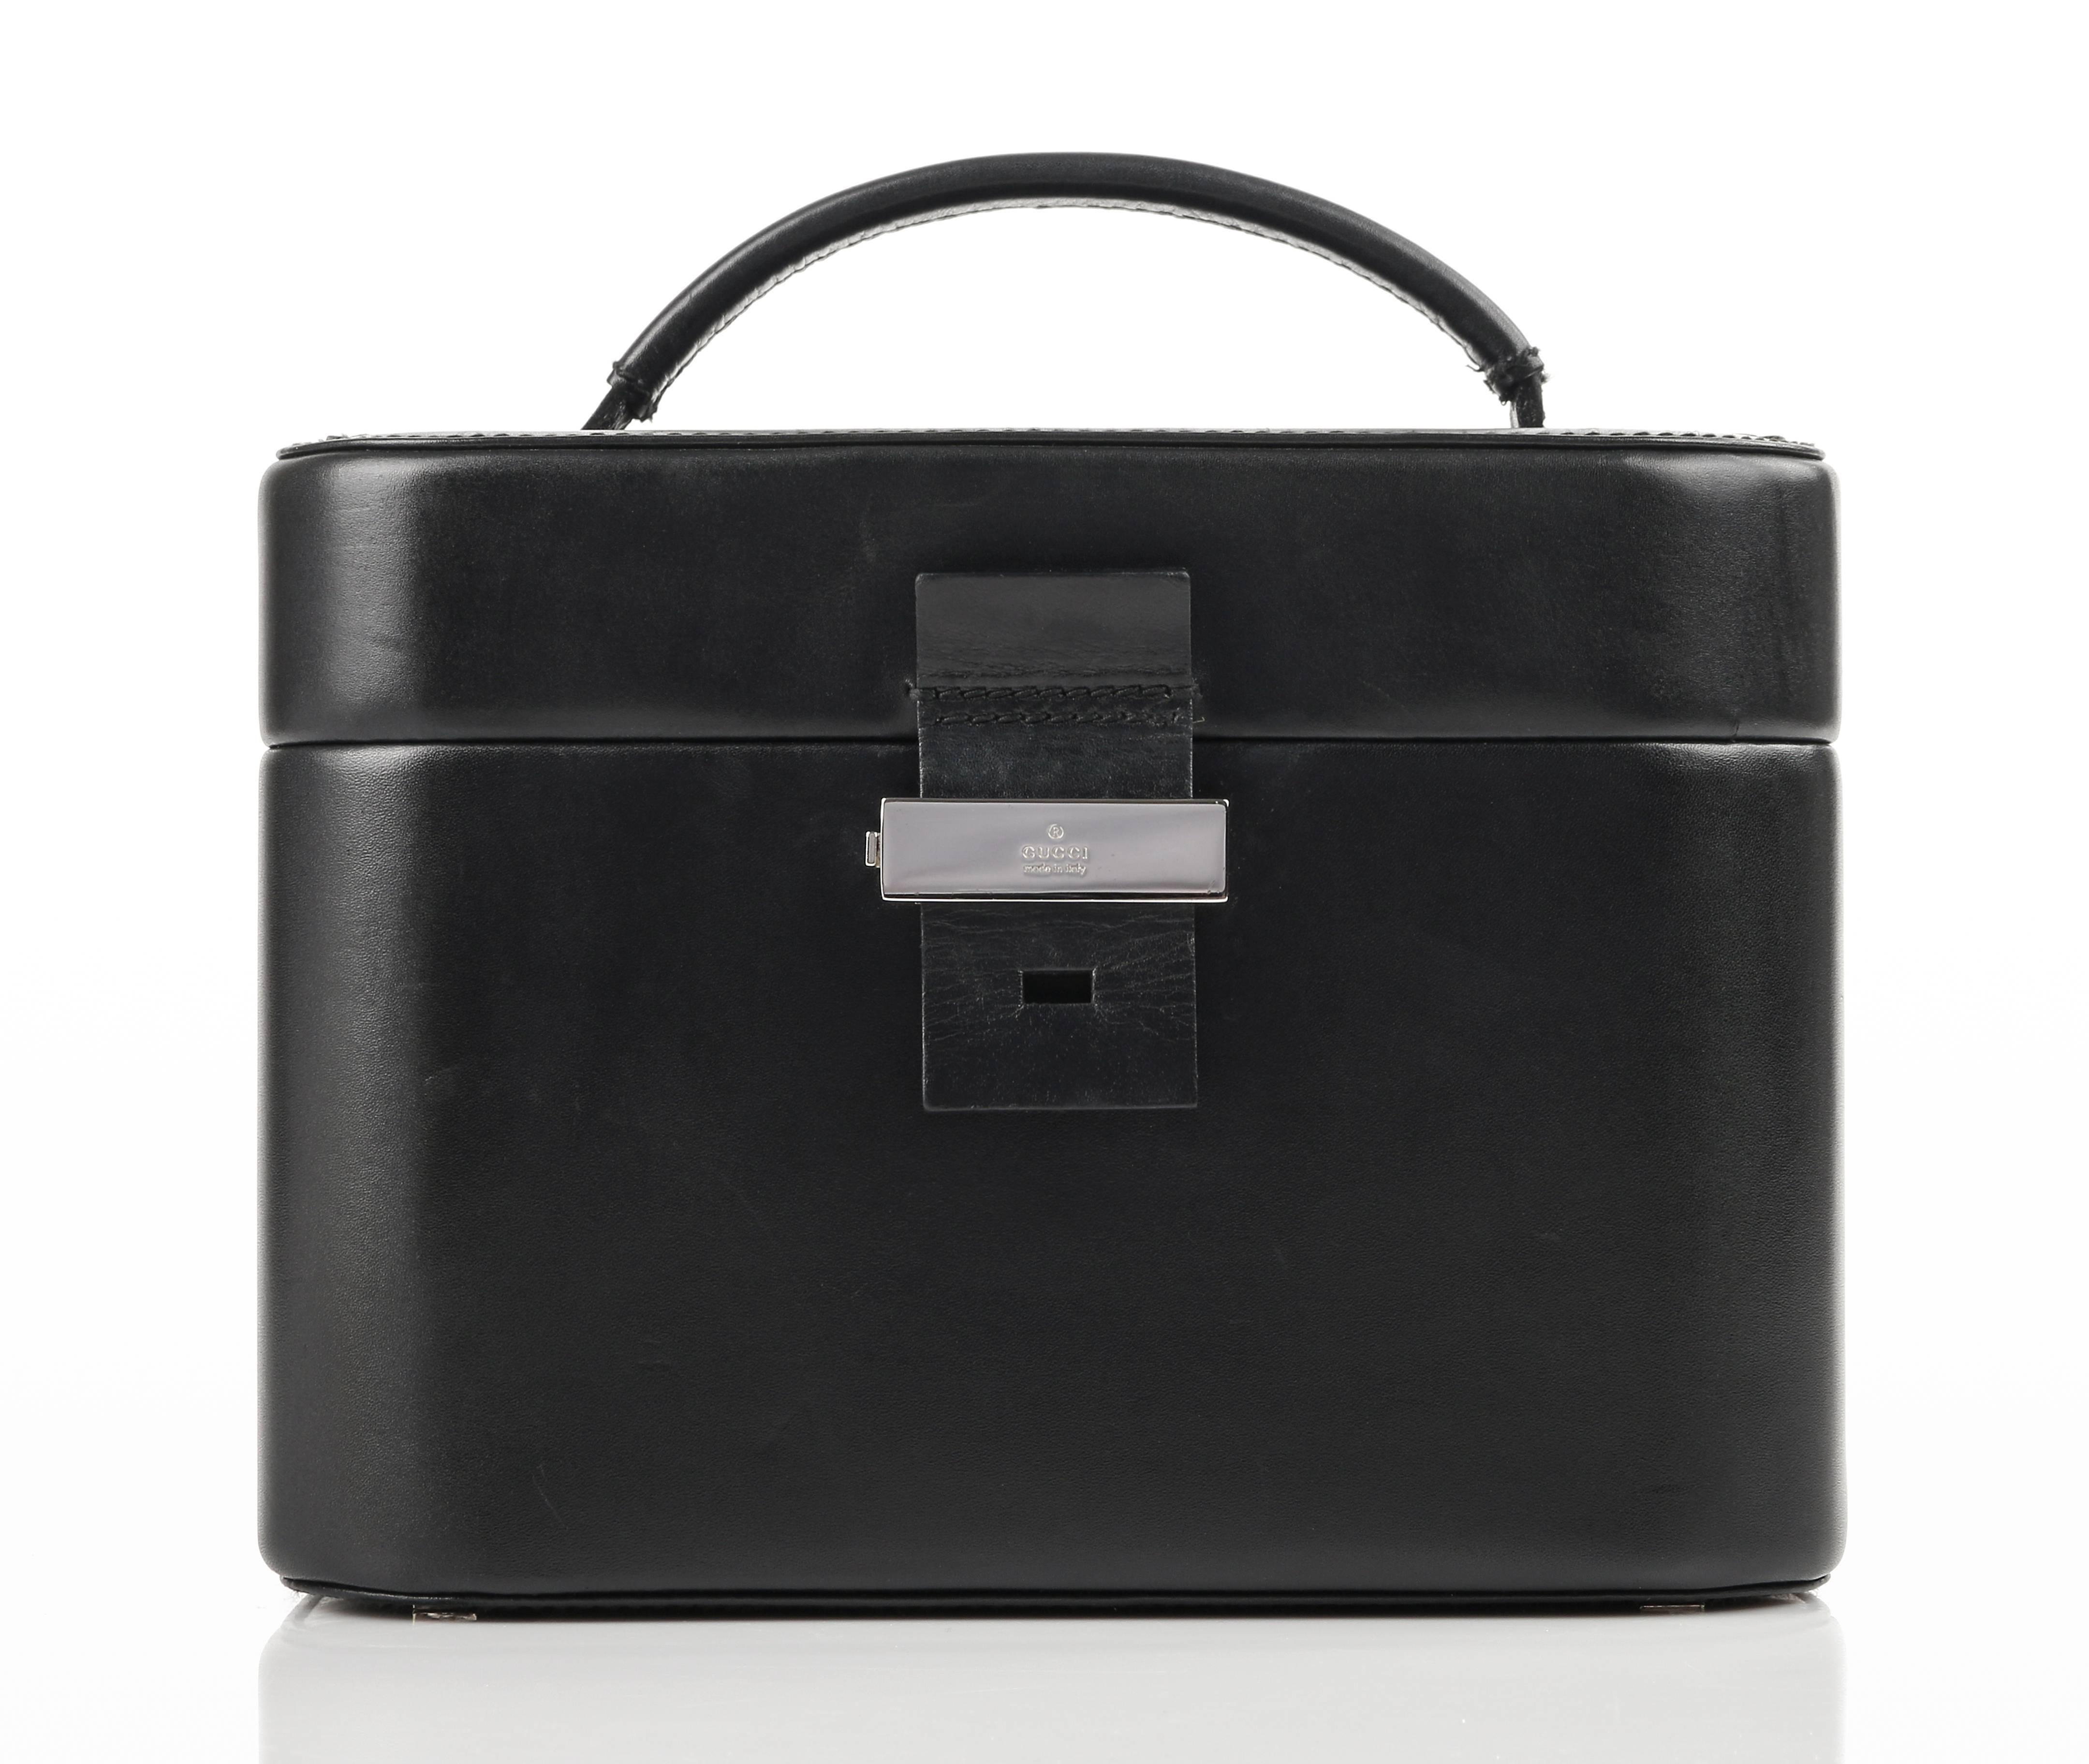 Gucci black genuine leather structured train case/cosmetic travel bag. Single flat double rolled handle. Leather tab and silver-toned metal latch top. Interior removable leather backed mirror secured to top of lid with leather strap and slide pocket